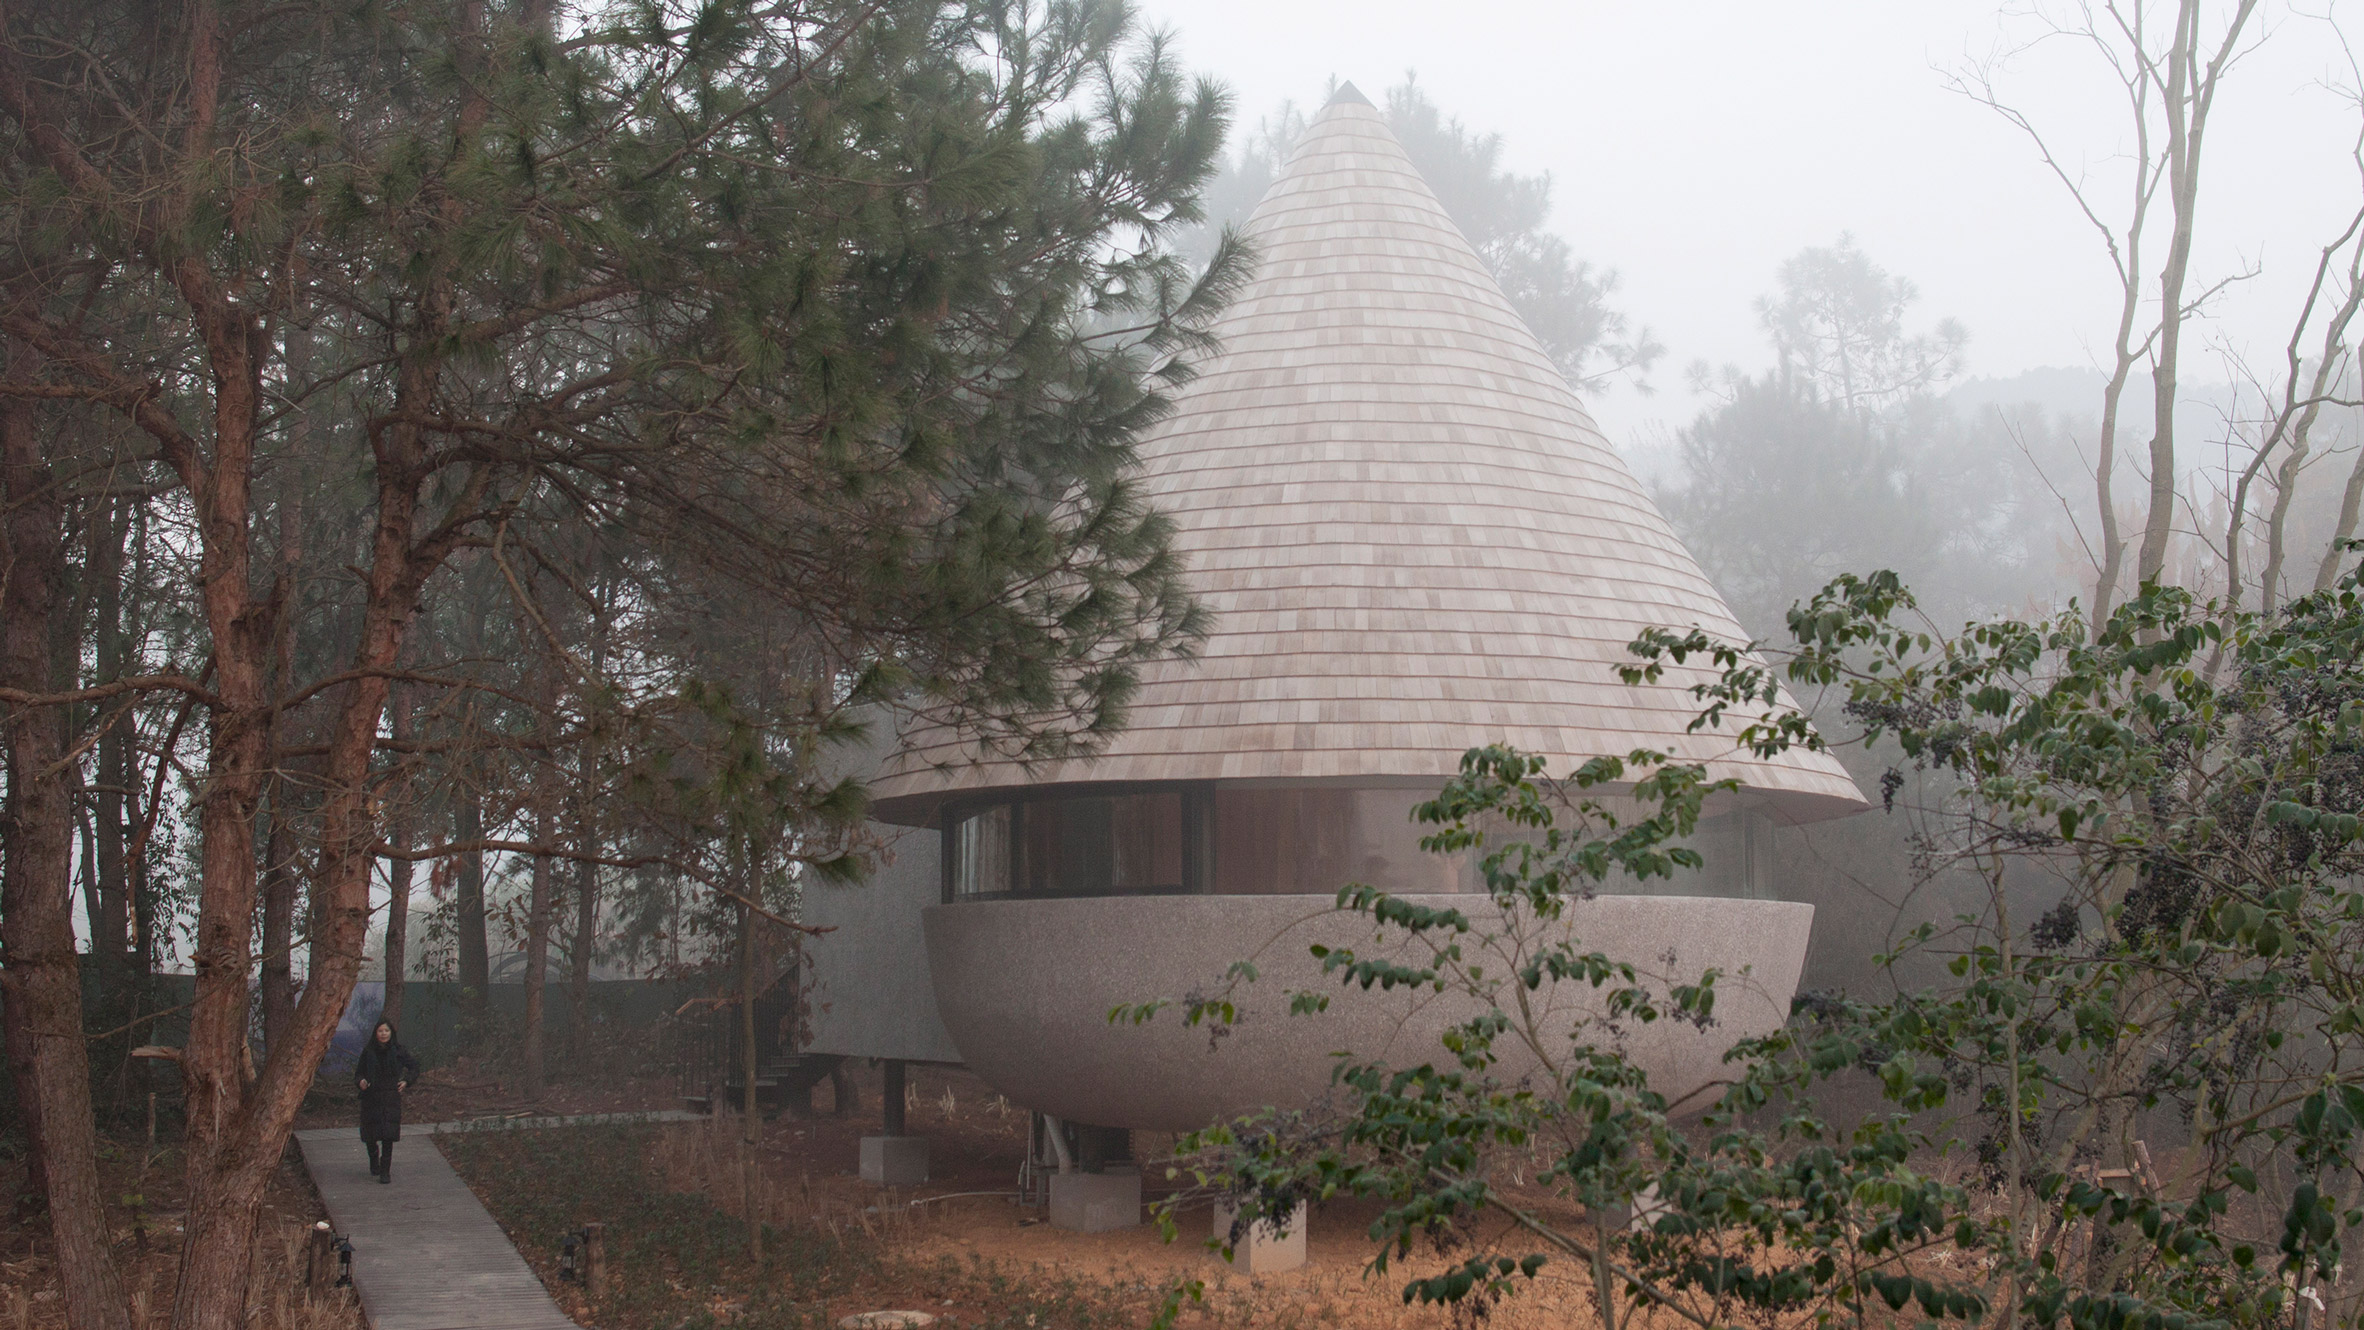 A guesthouse with a conical roof